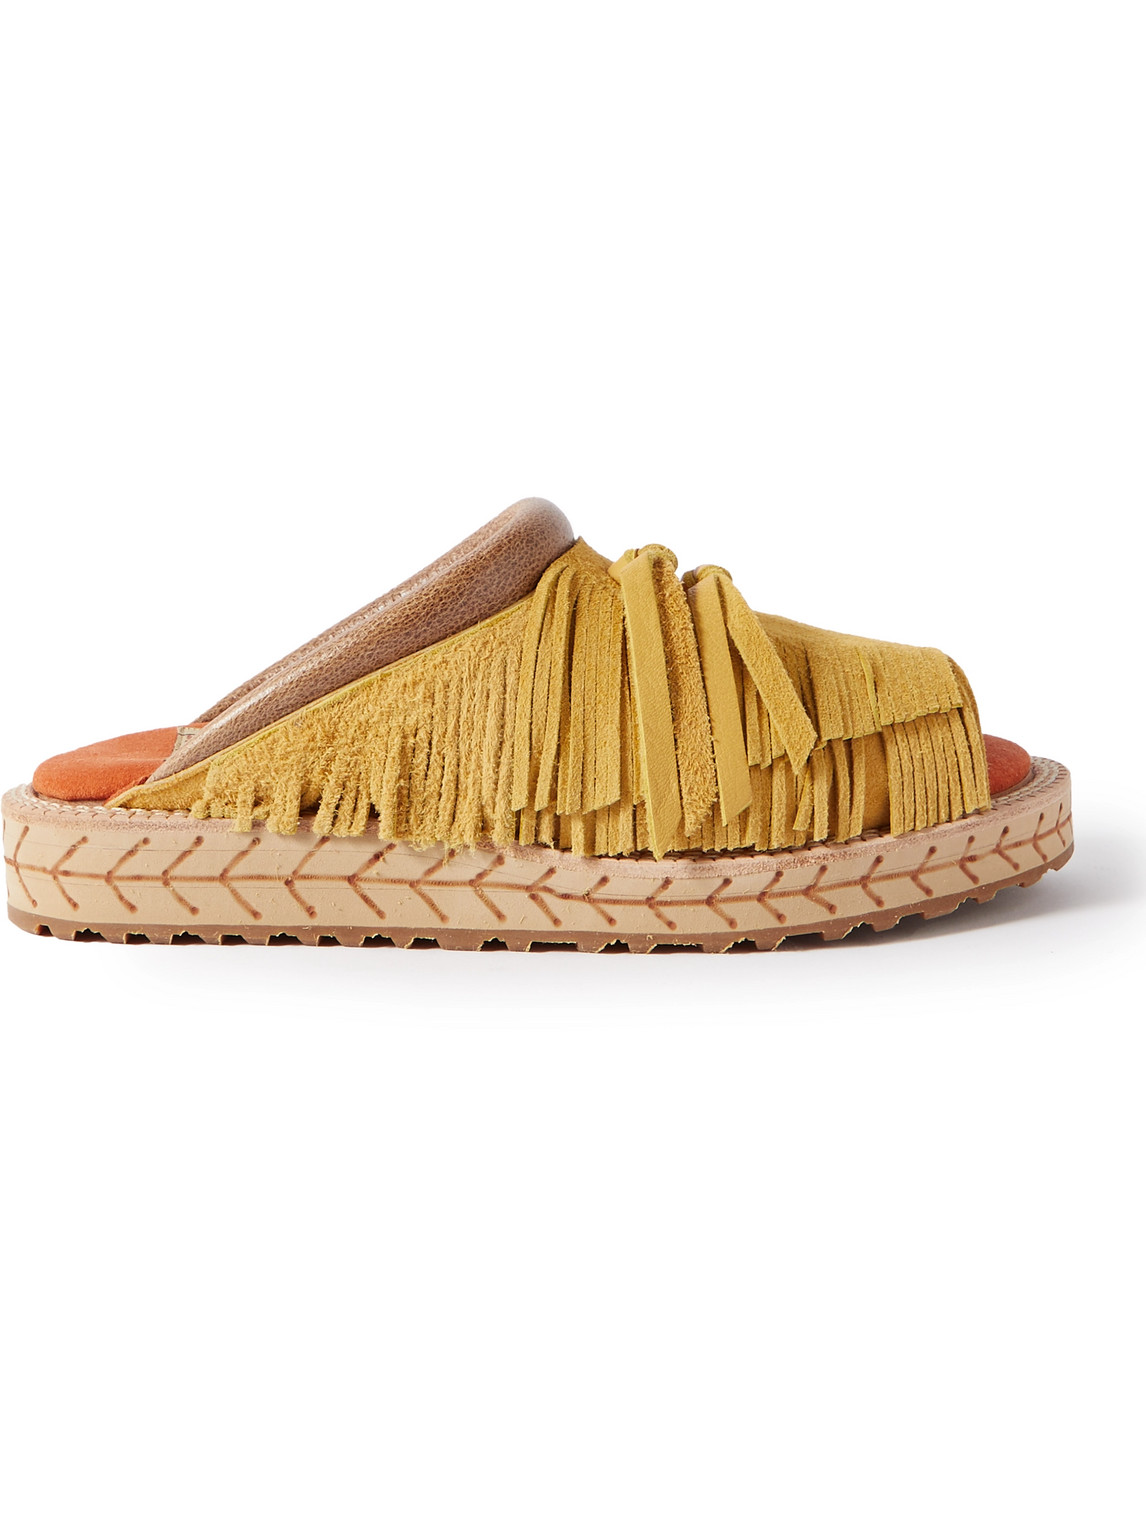 Fringed Leather-Trimmed Suede Sandals